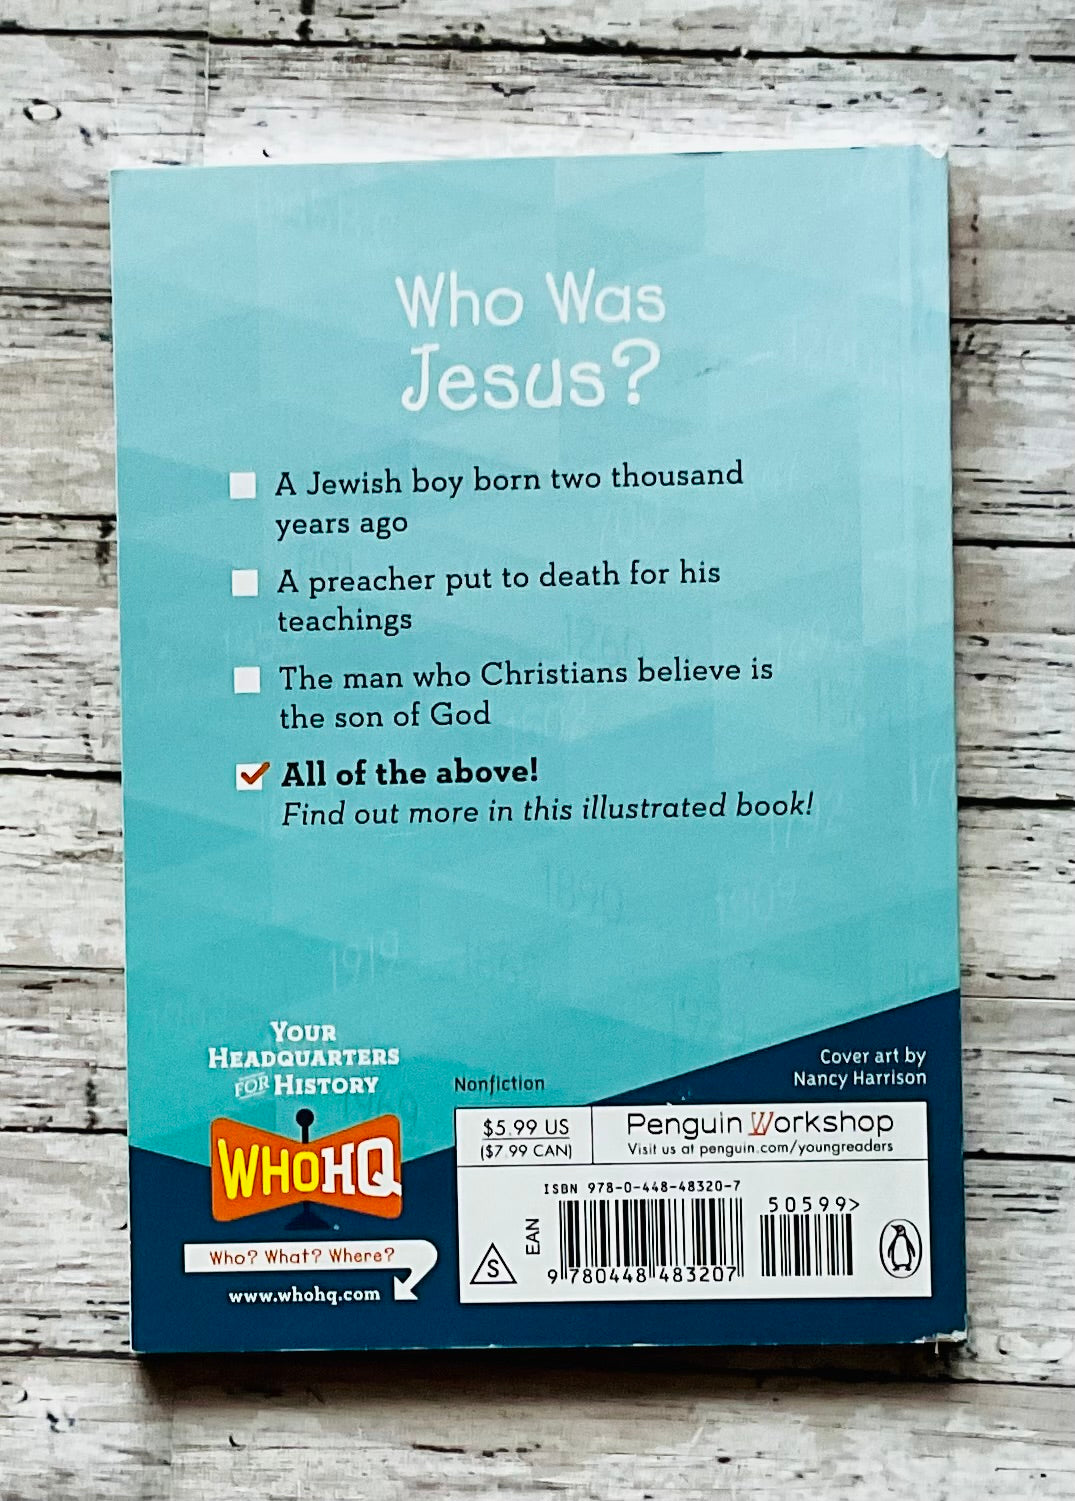 Who Was Jesus? - Anchored Homeschool Resource Center